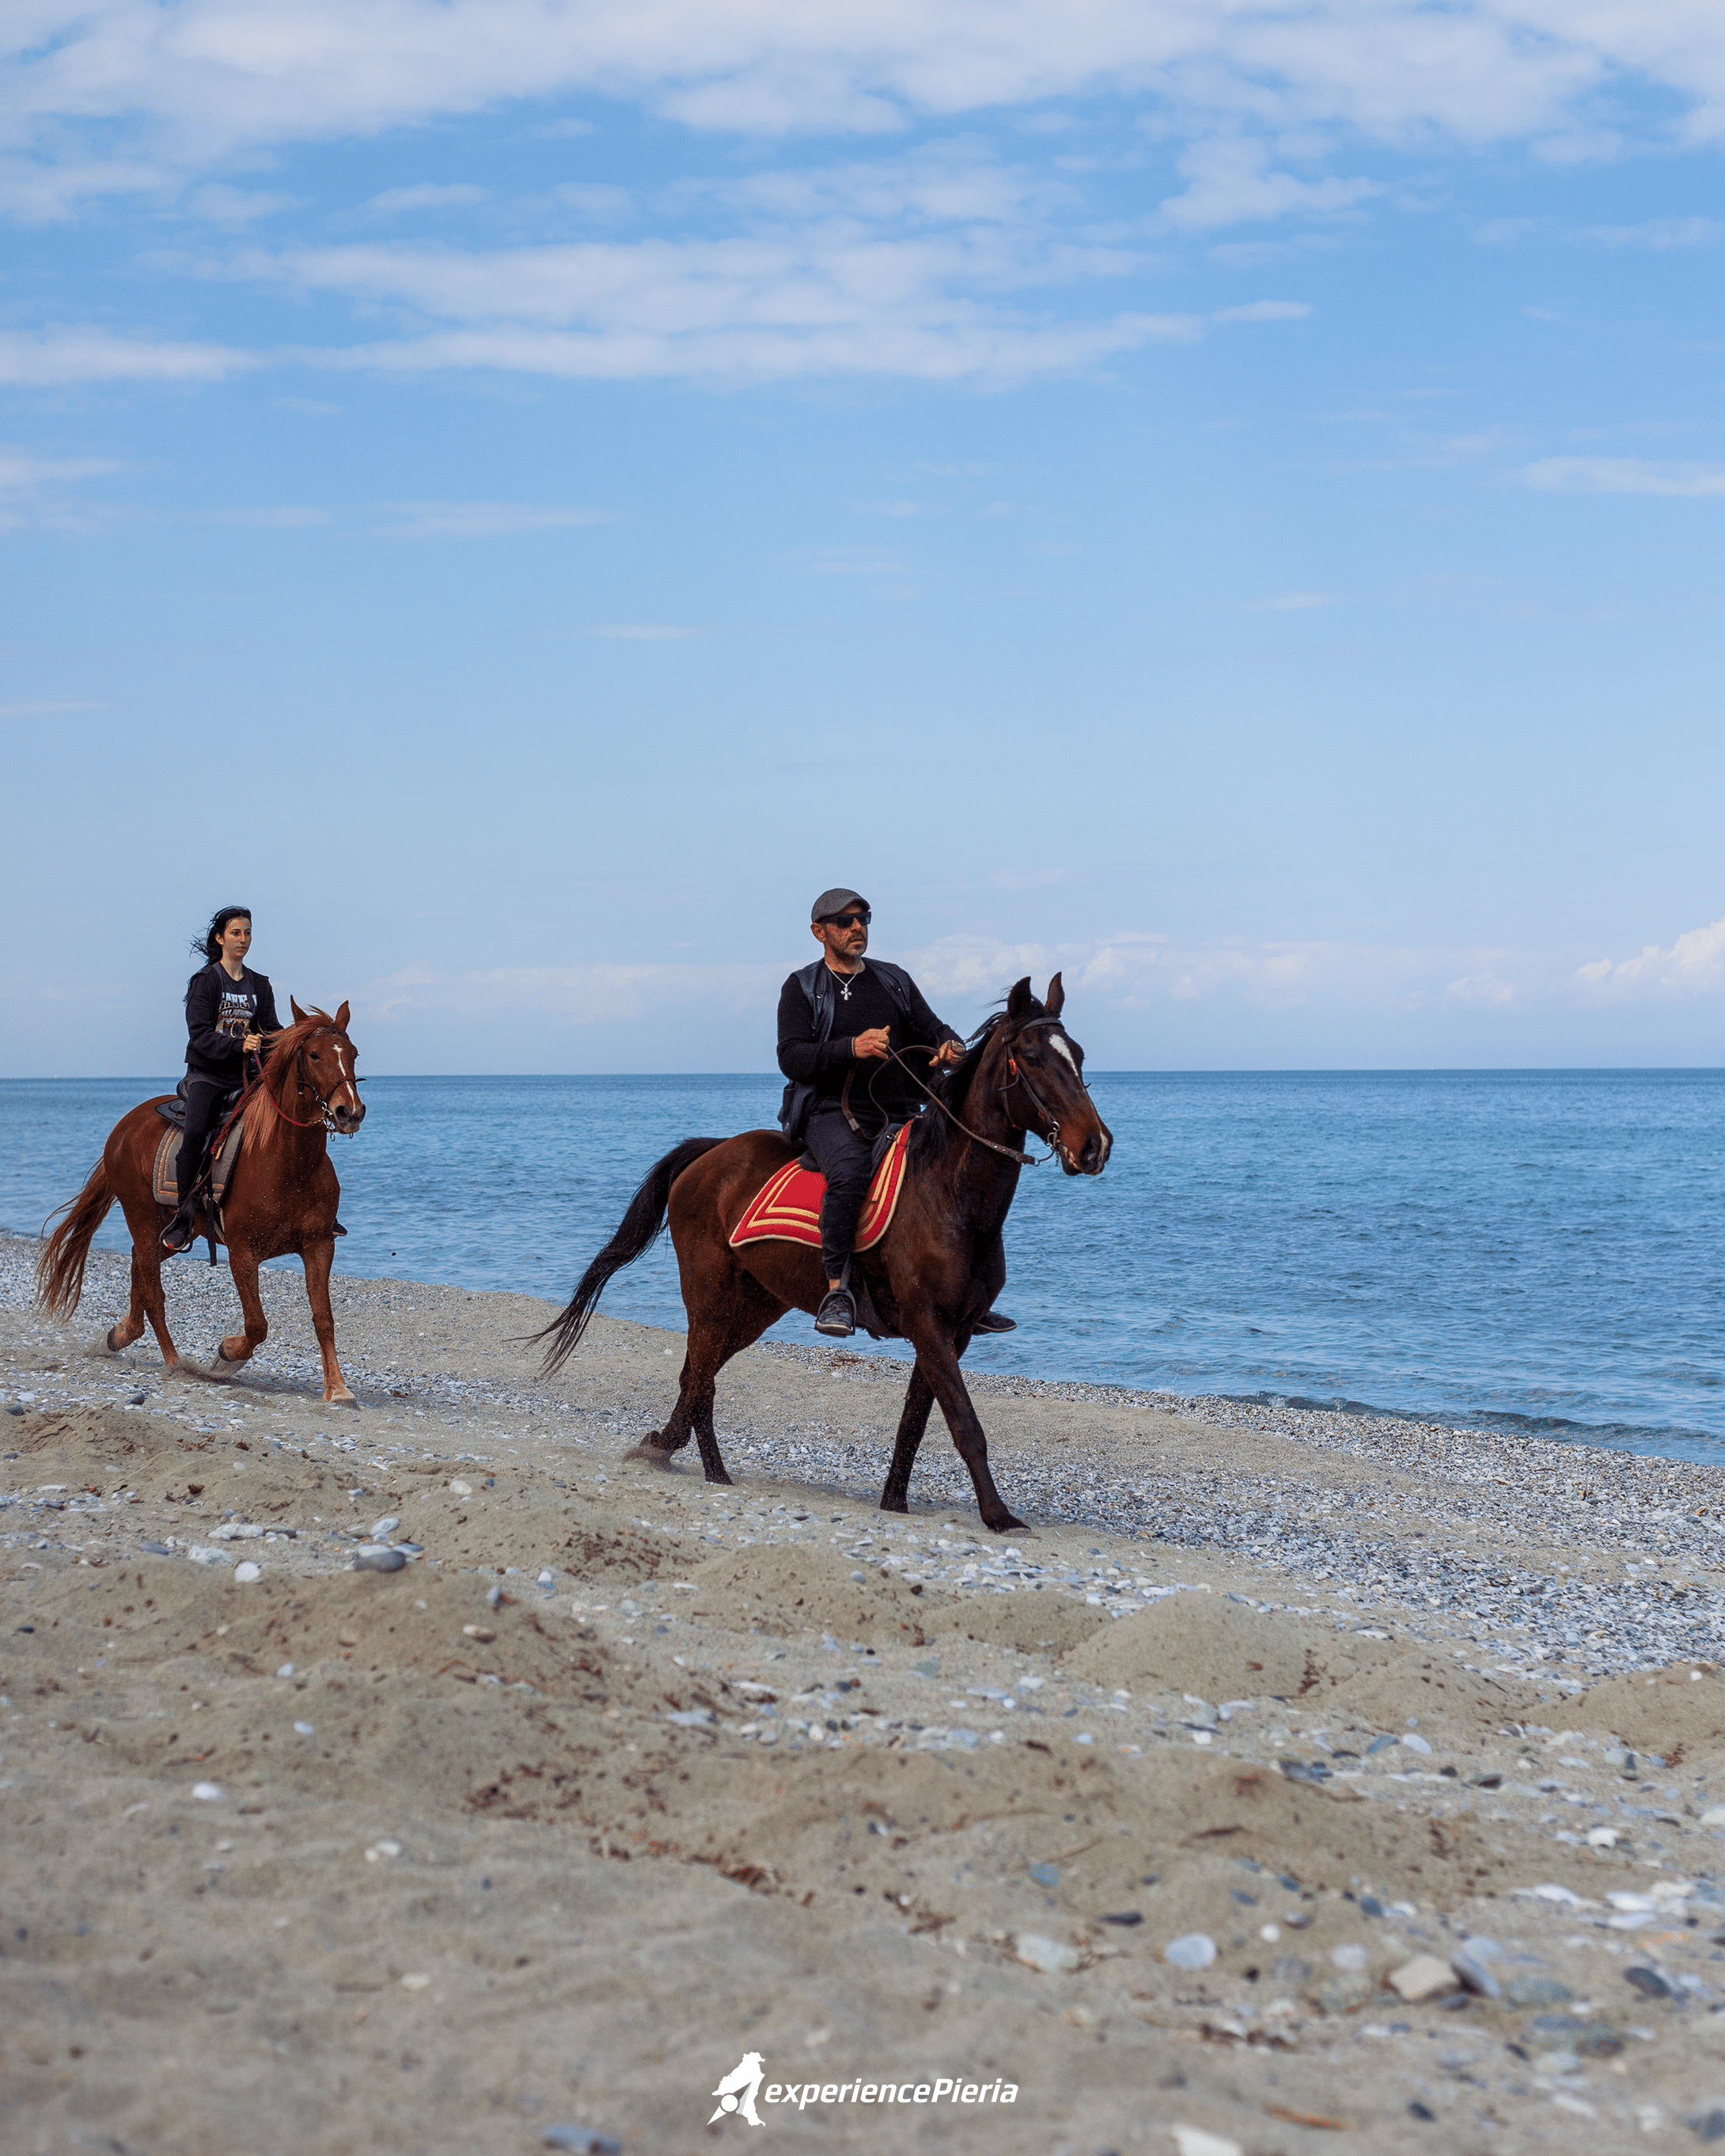 two persons riding 2 horses on Leptokarya's beach chore, best beaches in Pieria for riding horses.